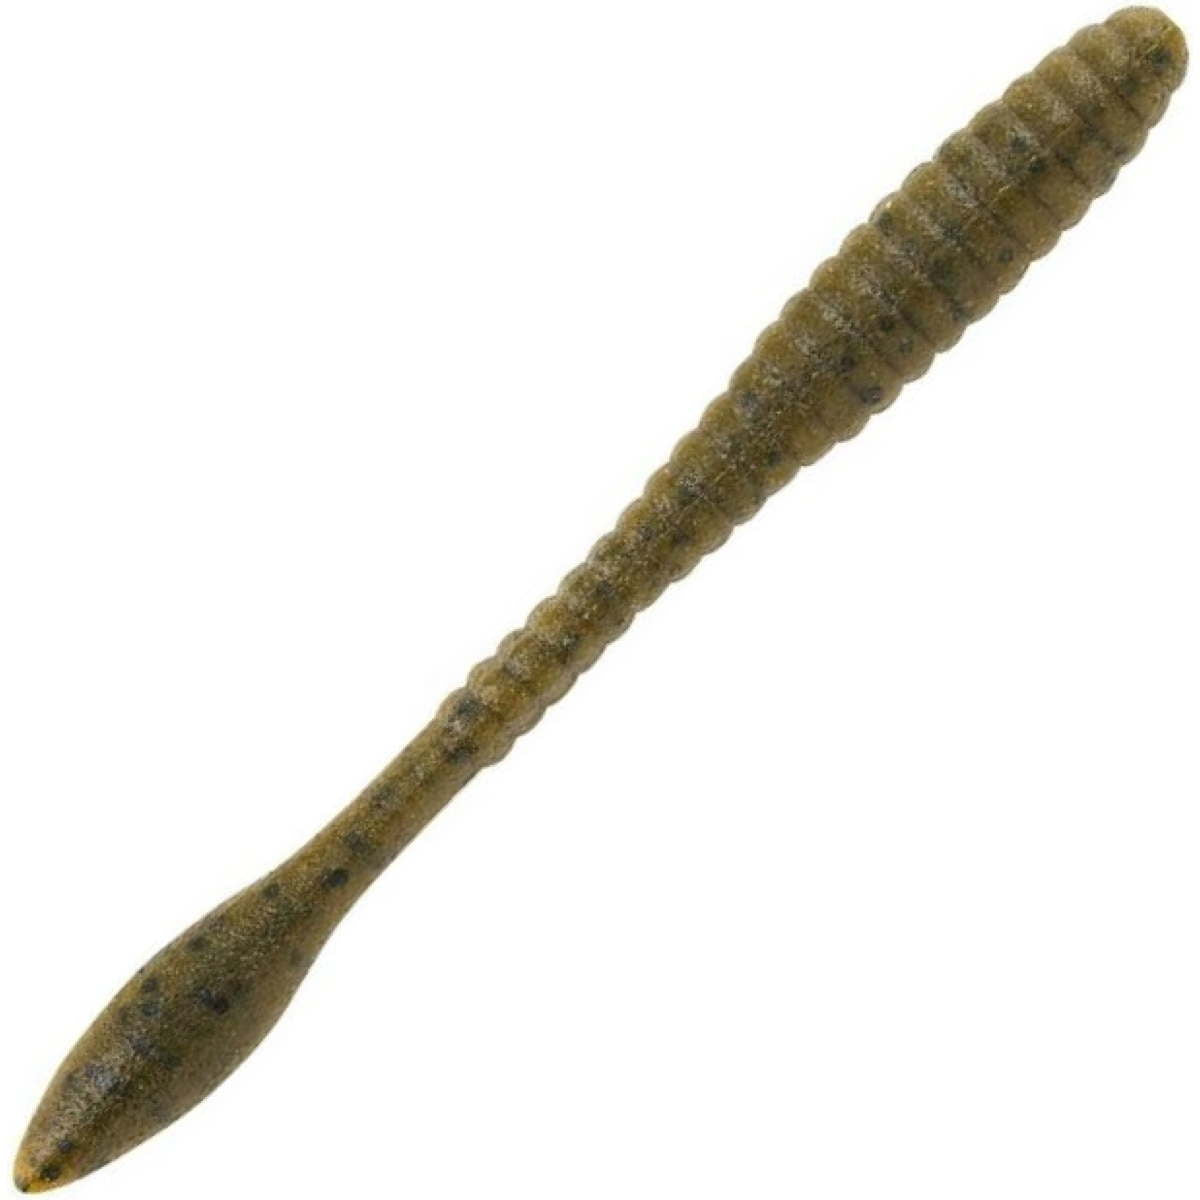 Photo of Berkley PowerBait MaxScent Flat Worm for sale at United Tackle Shops.